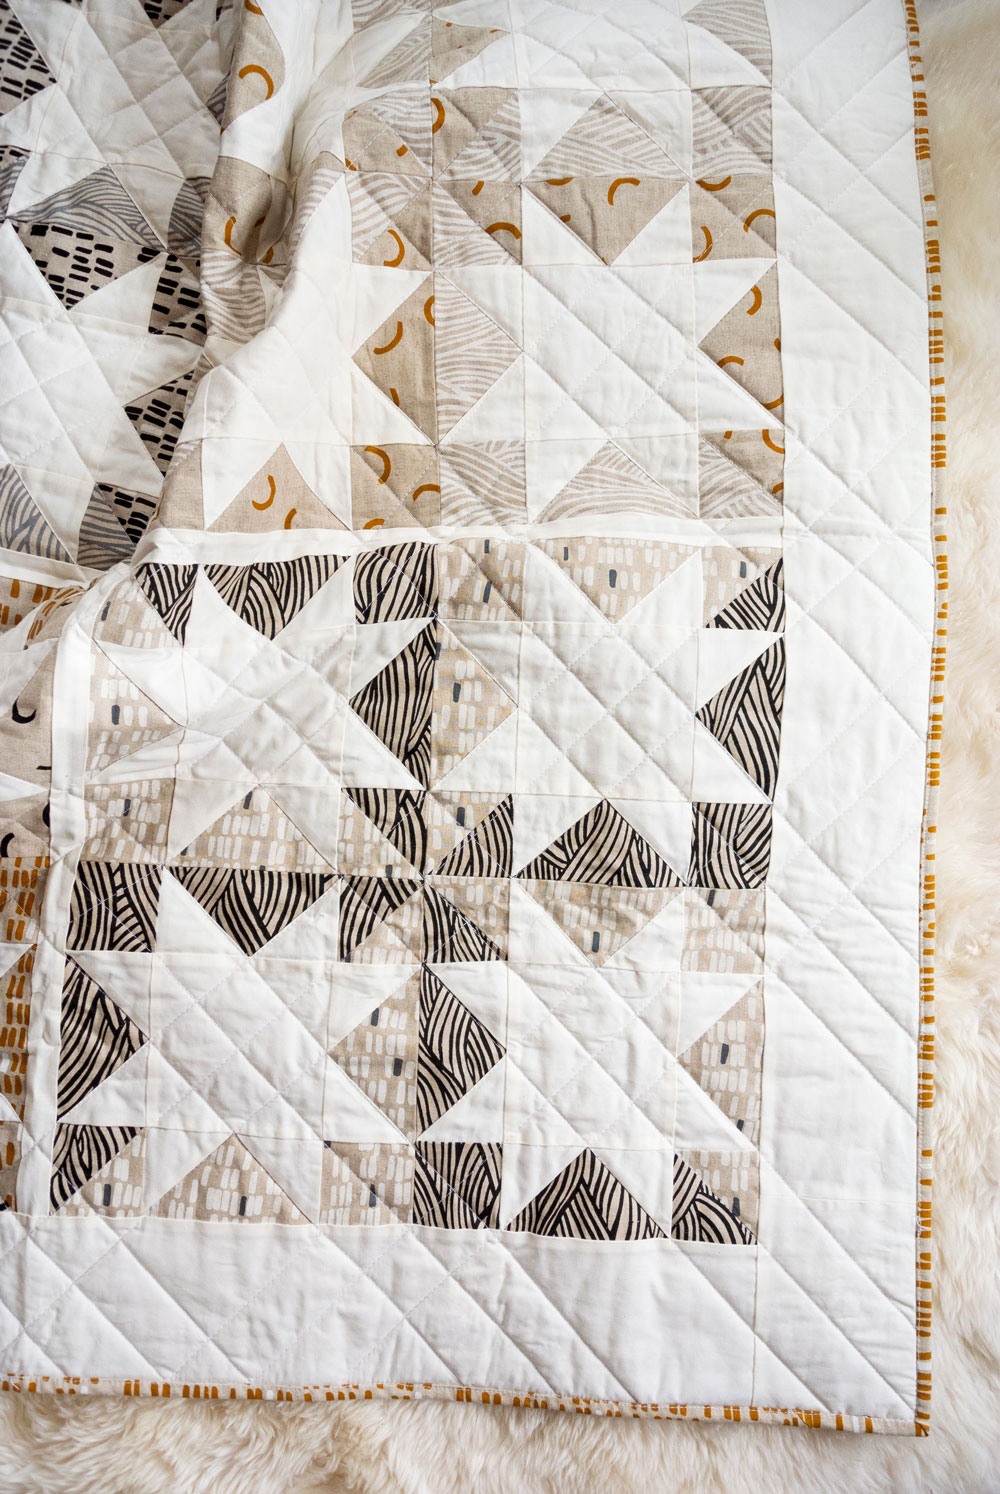 Make a sophisticated, neutral quilt using the Stars Hollow quilt pattern. This is a classic quilt pattern, but with a modern twist. The design plays on negative space to create traditional sawtooth star quilt blocks. suzyquilts.com #linen #quilting